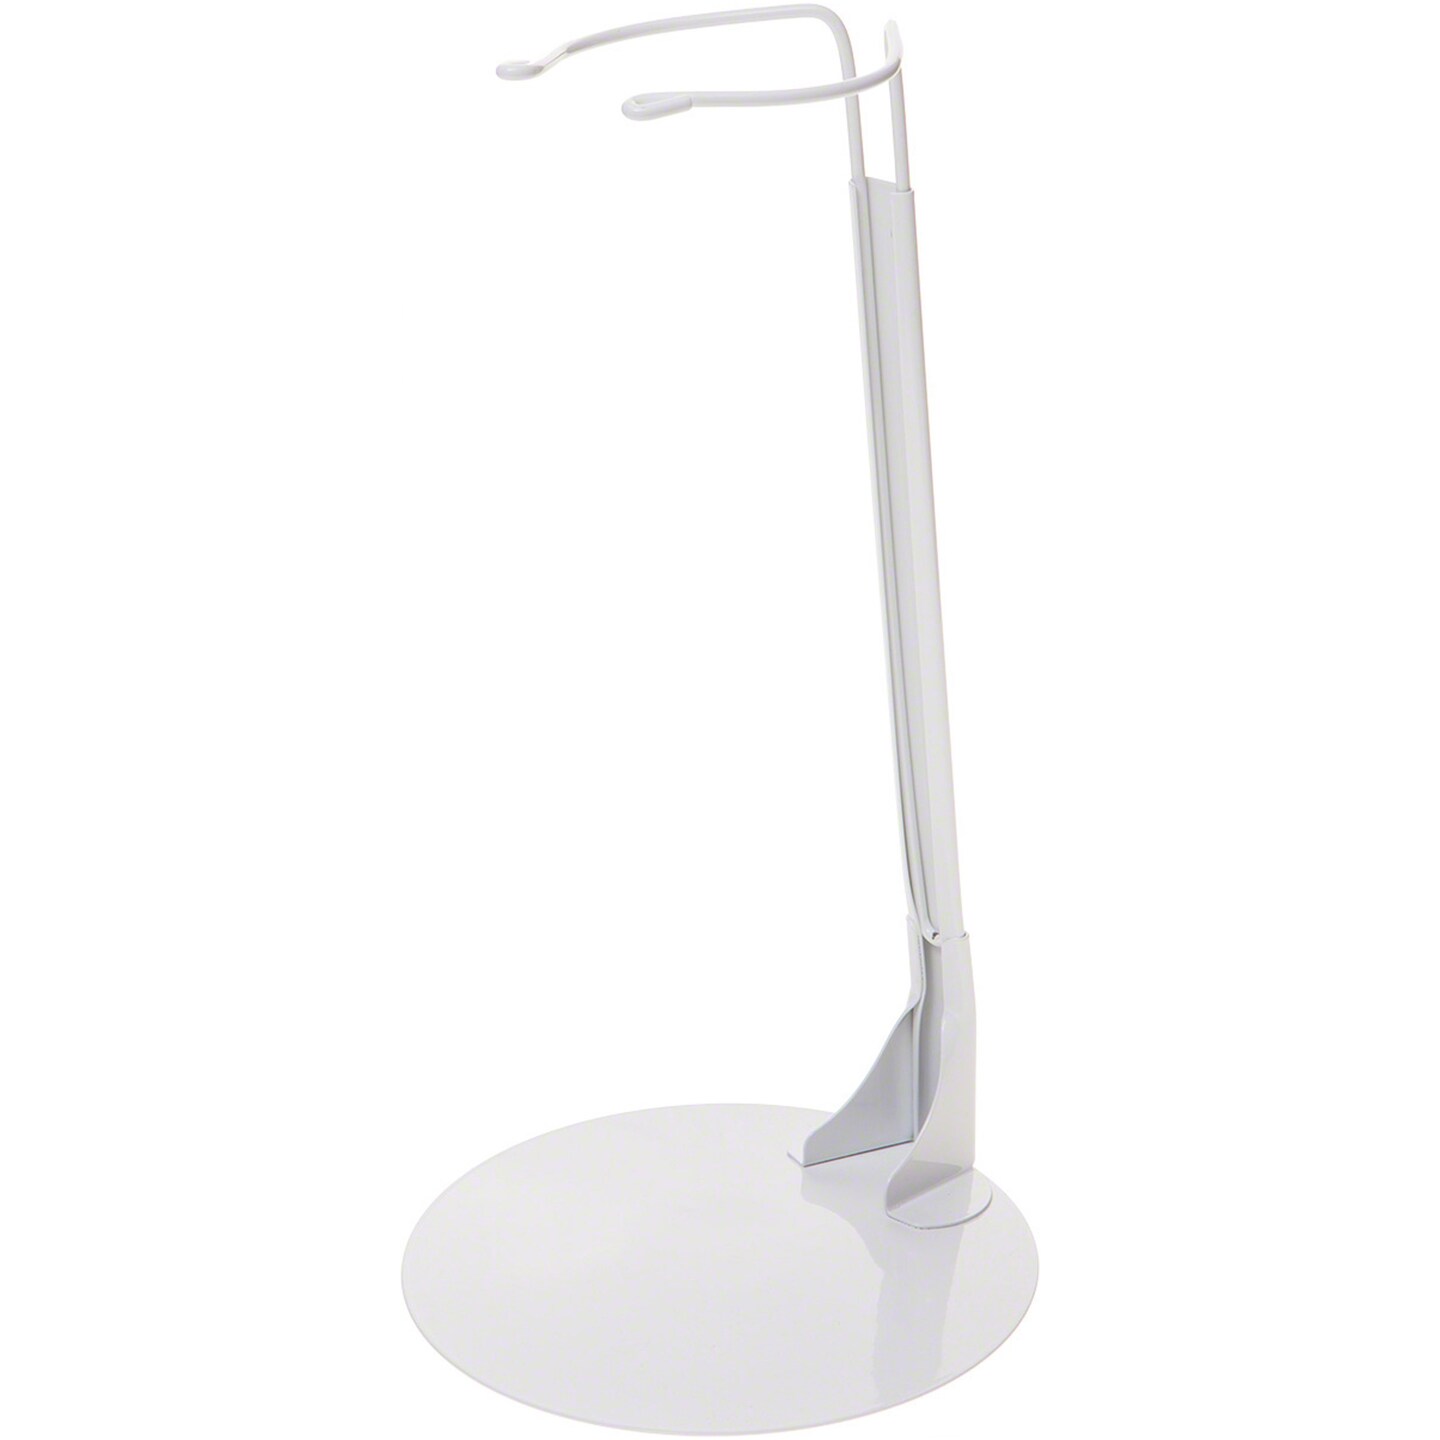 Kaiser 4001 White Adjustable Doll Stand, fits 24 to 36 inch Dolls, waist width adjusts from 2.75 to 3.25 inches